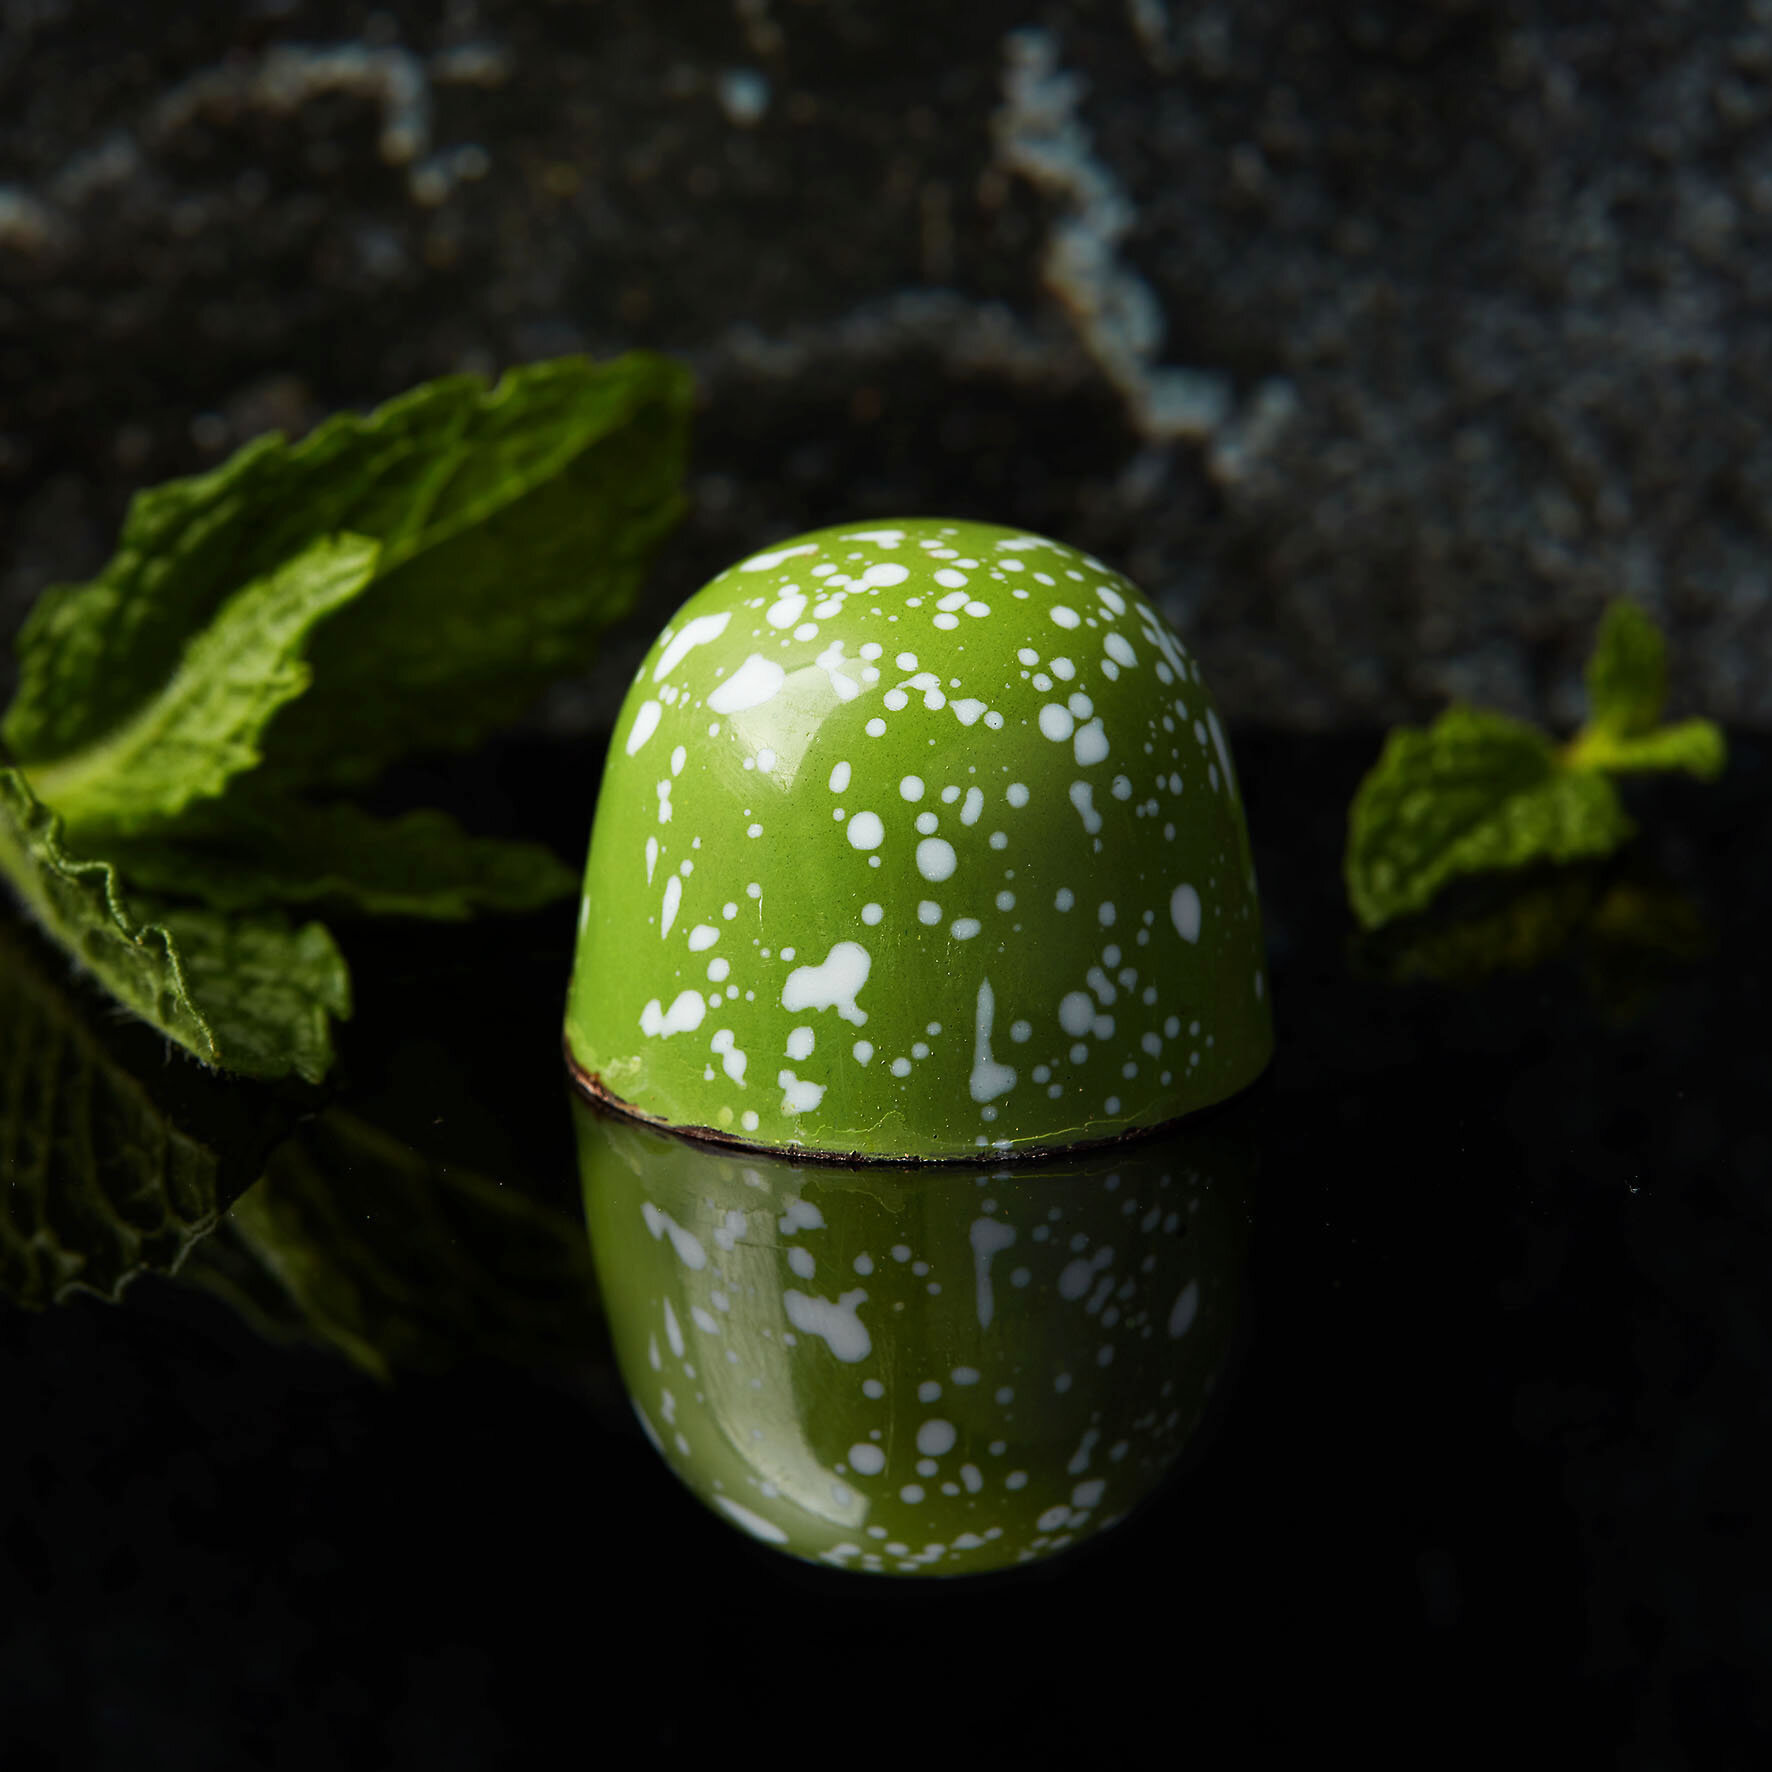 I first tried these heavenly BonBons at an Easter market in Taupo, and we fell in love! 

Which pic do you prefer? Full Bonbon or showing the inside? Perhaps a picture showing both? Dark vibe like this one? Or light like the next post? These are just